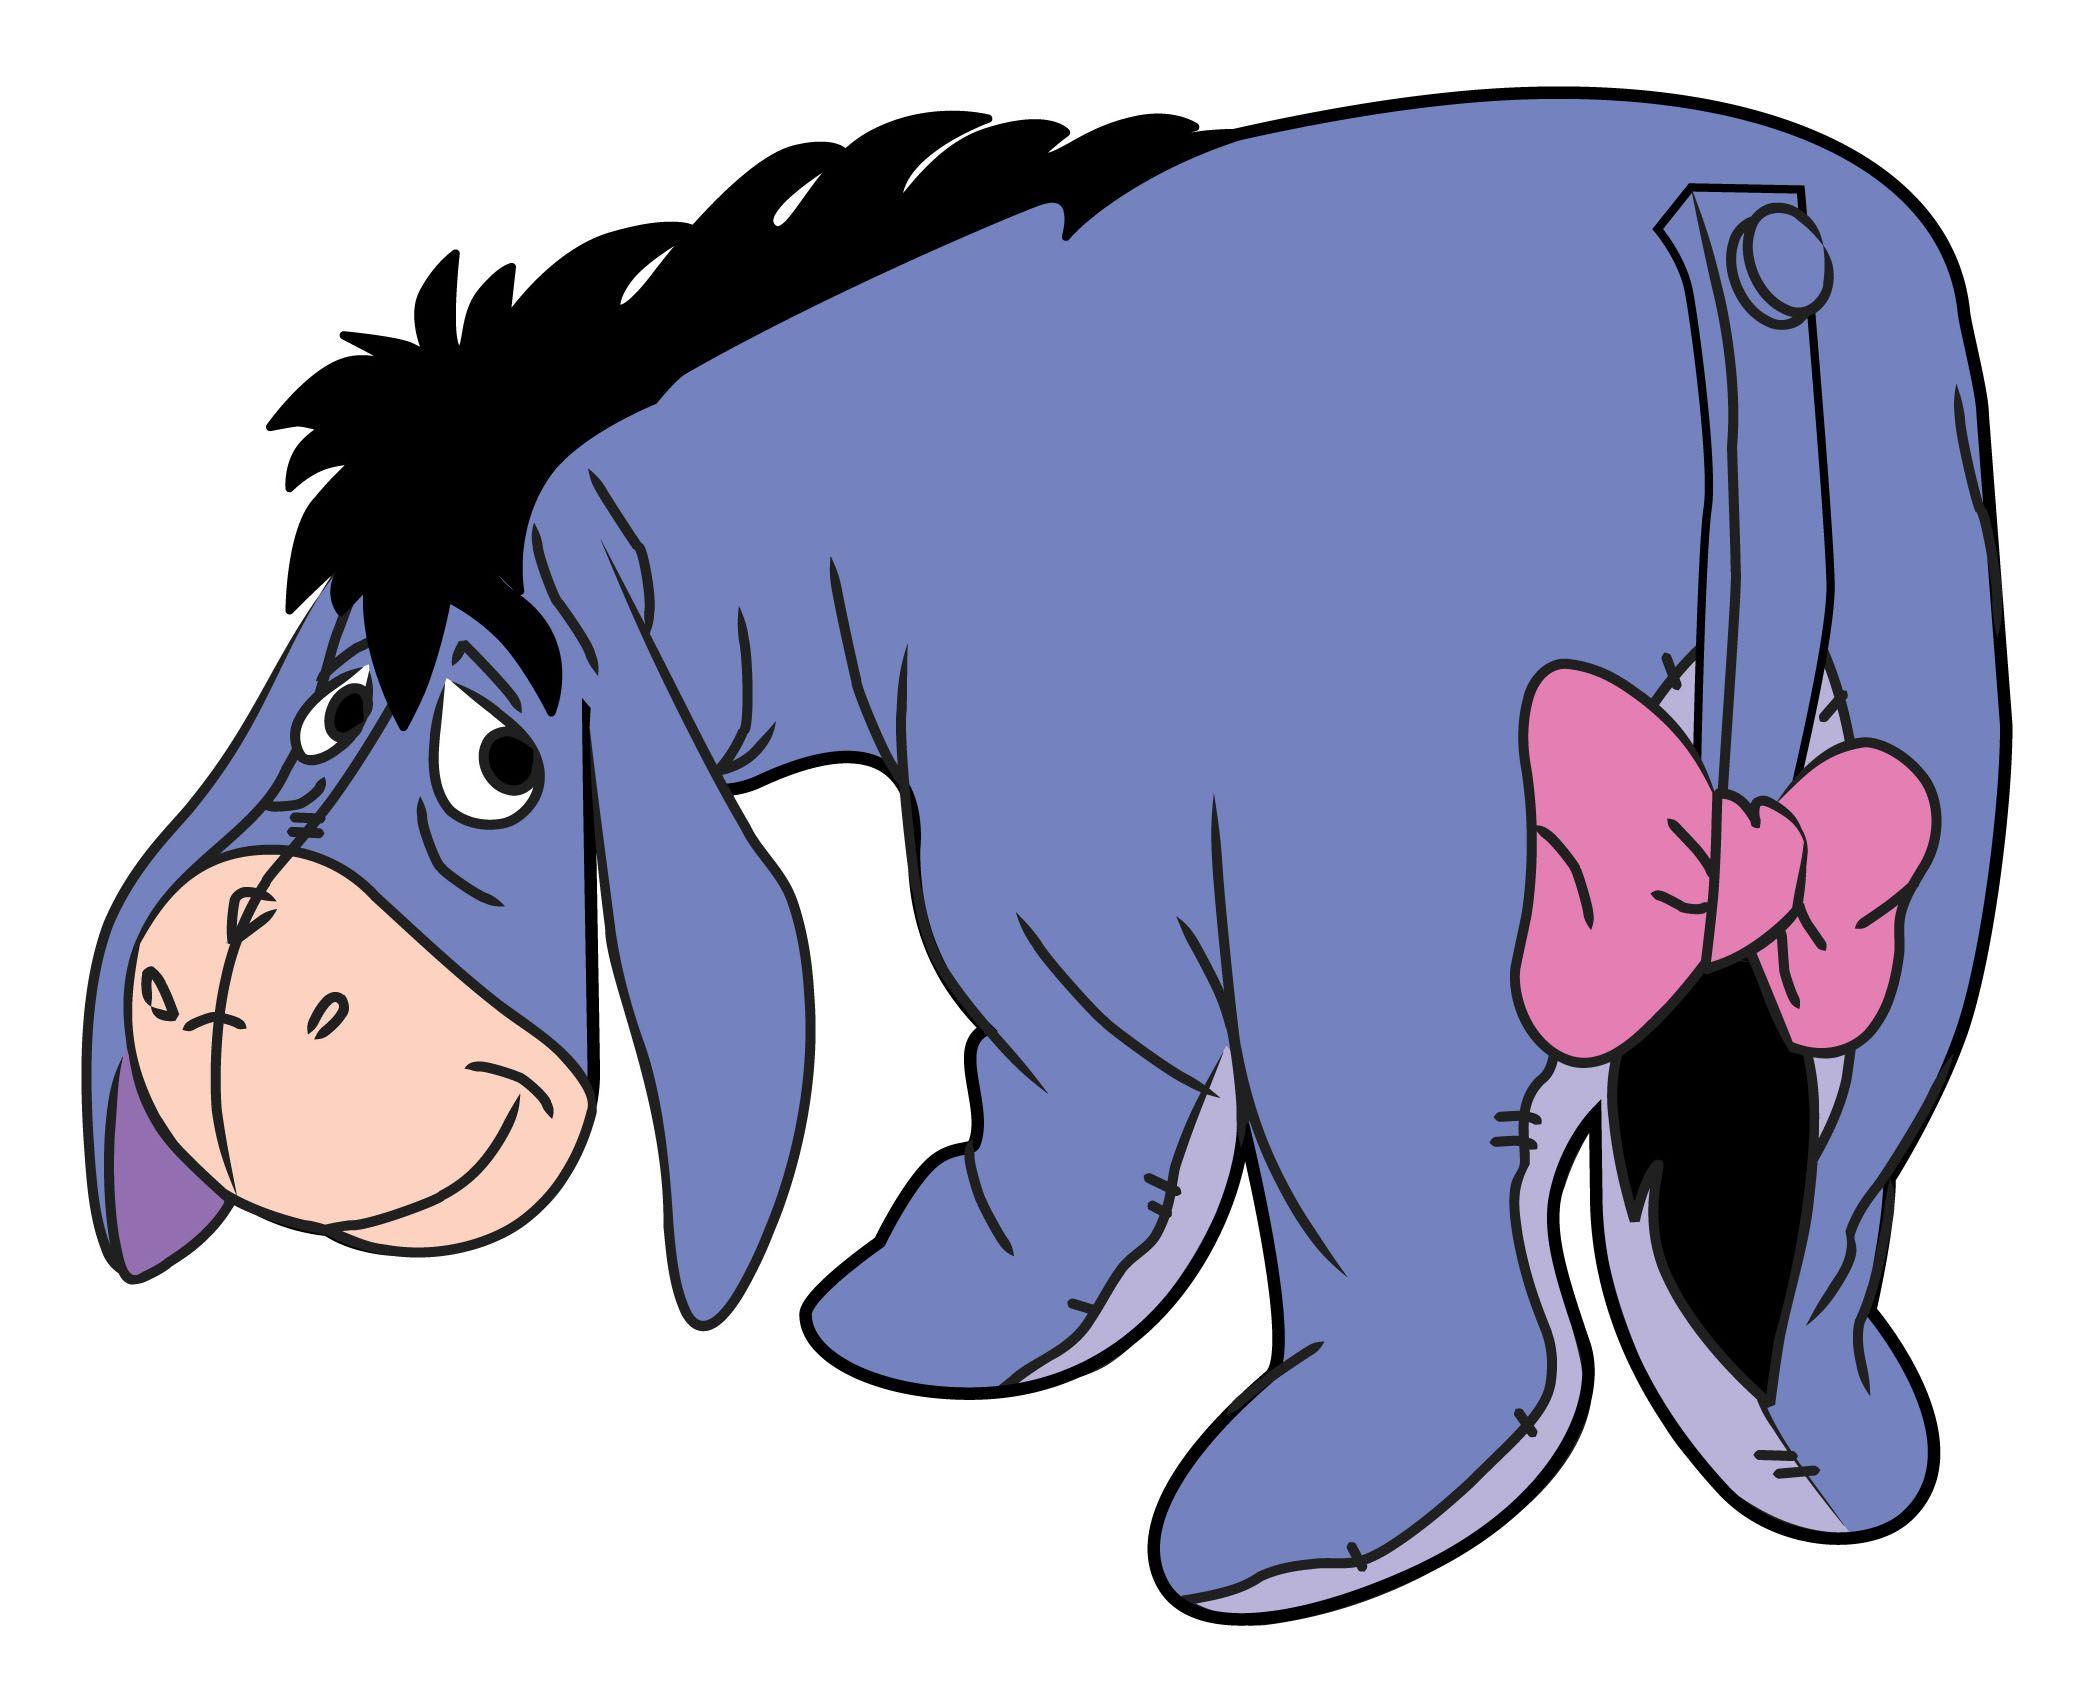 1080x1920  1080x1920 eeyore christopher robin 2018 movies movies hd  disney 5k for Iphone 6 7 8 wallpaper  Coolwallpapersme